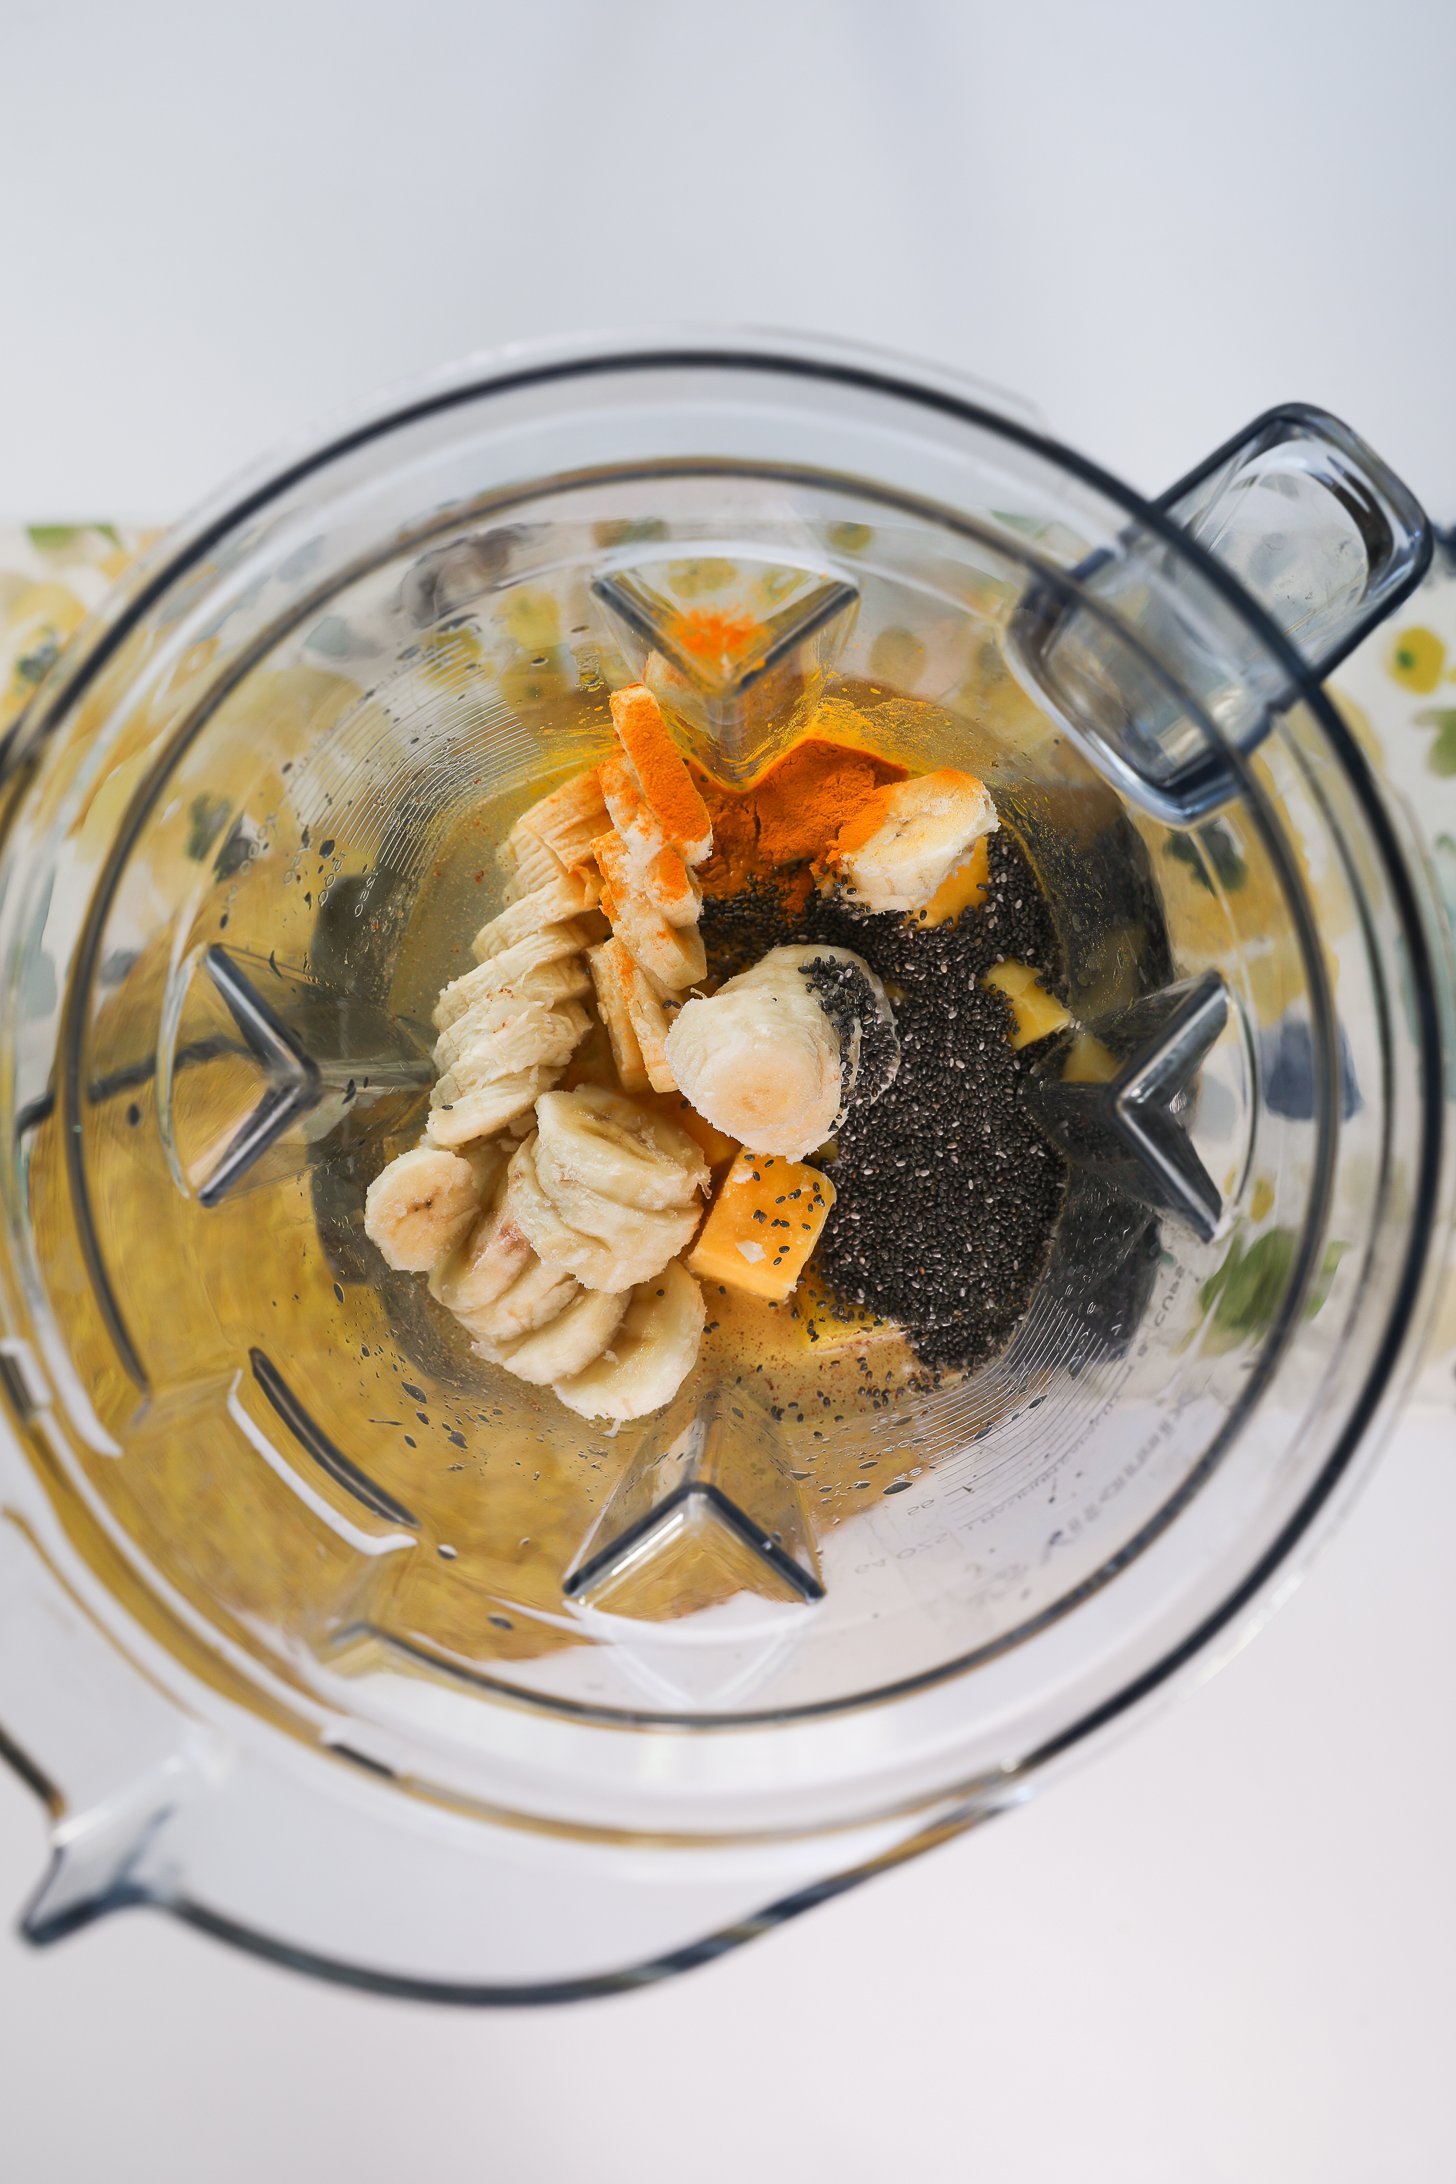 Top view of a blender filled with banana slices, mango and pineapple chunks, chia seeds and turmeric powder.